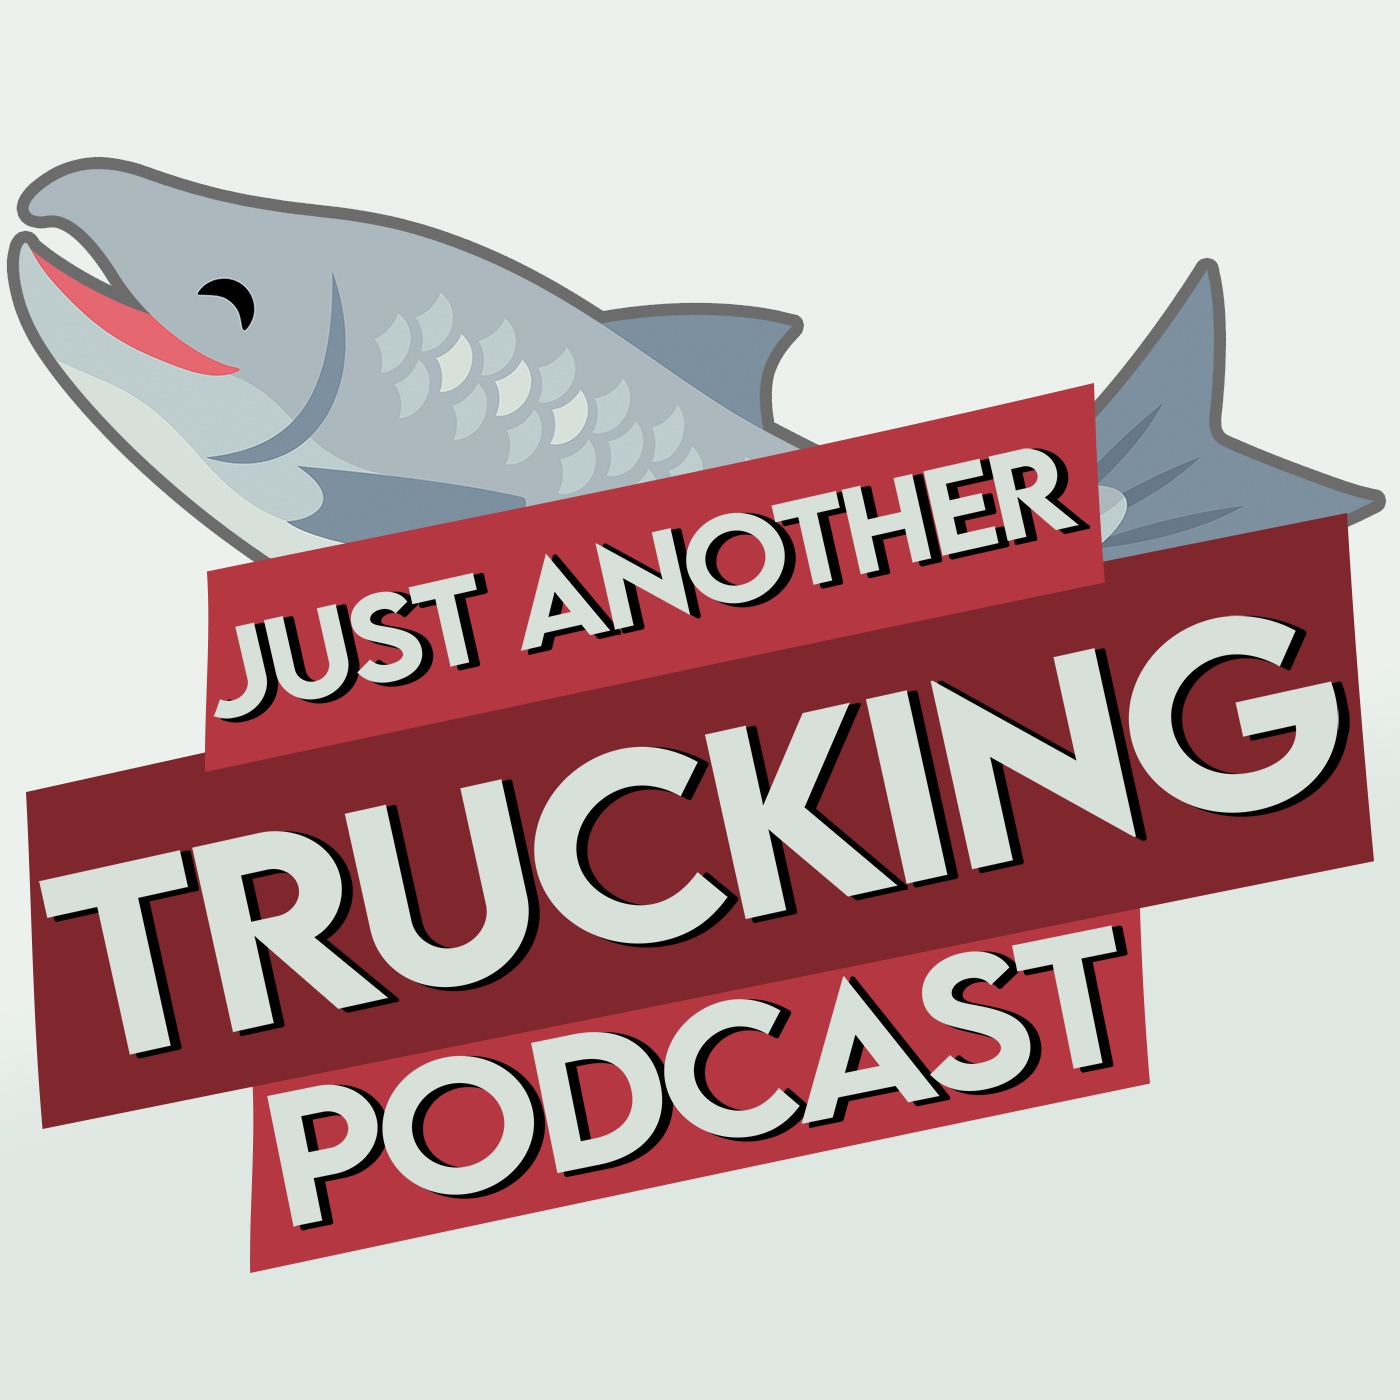 The things people do when they are drunk!! - Just another trucking podcast